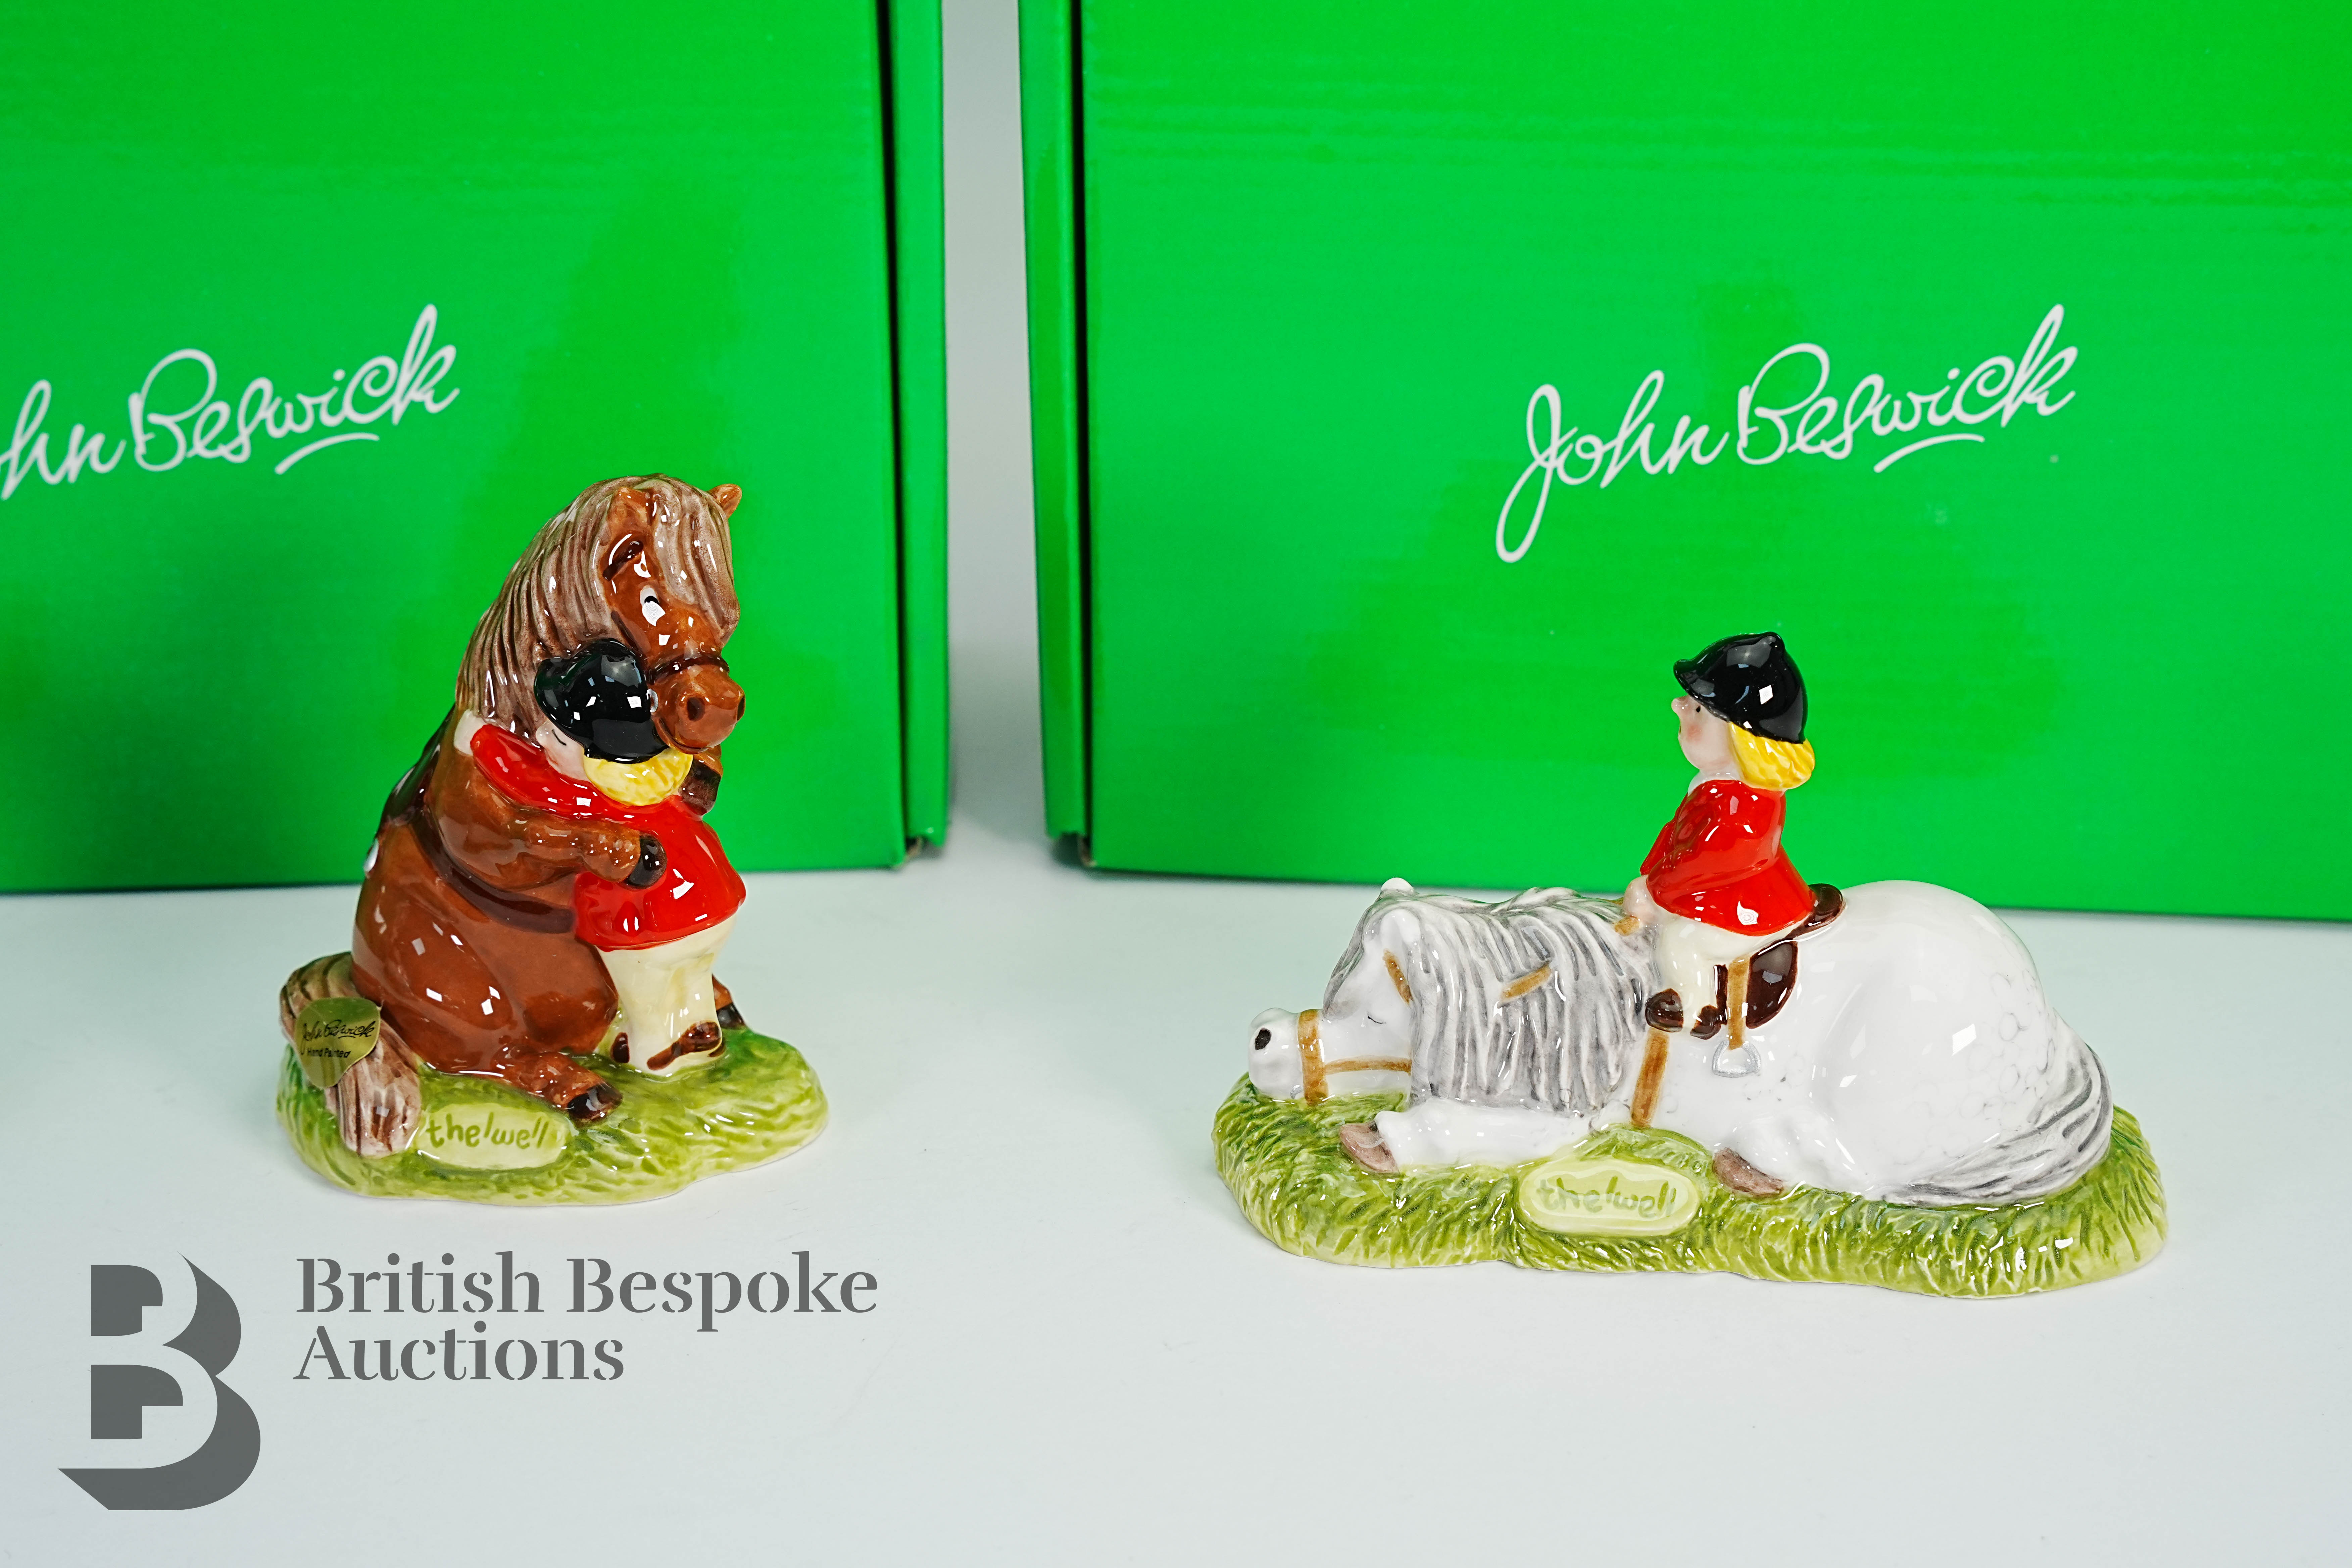 John Beswick Hand Painted Norman Thelwell Figurines - Image 4 of 6